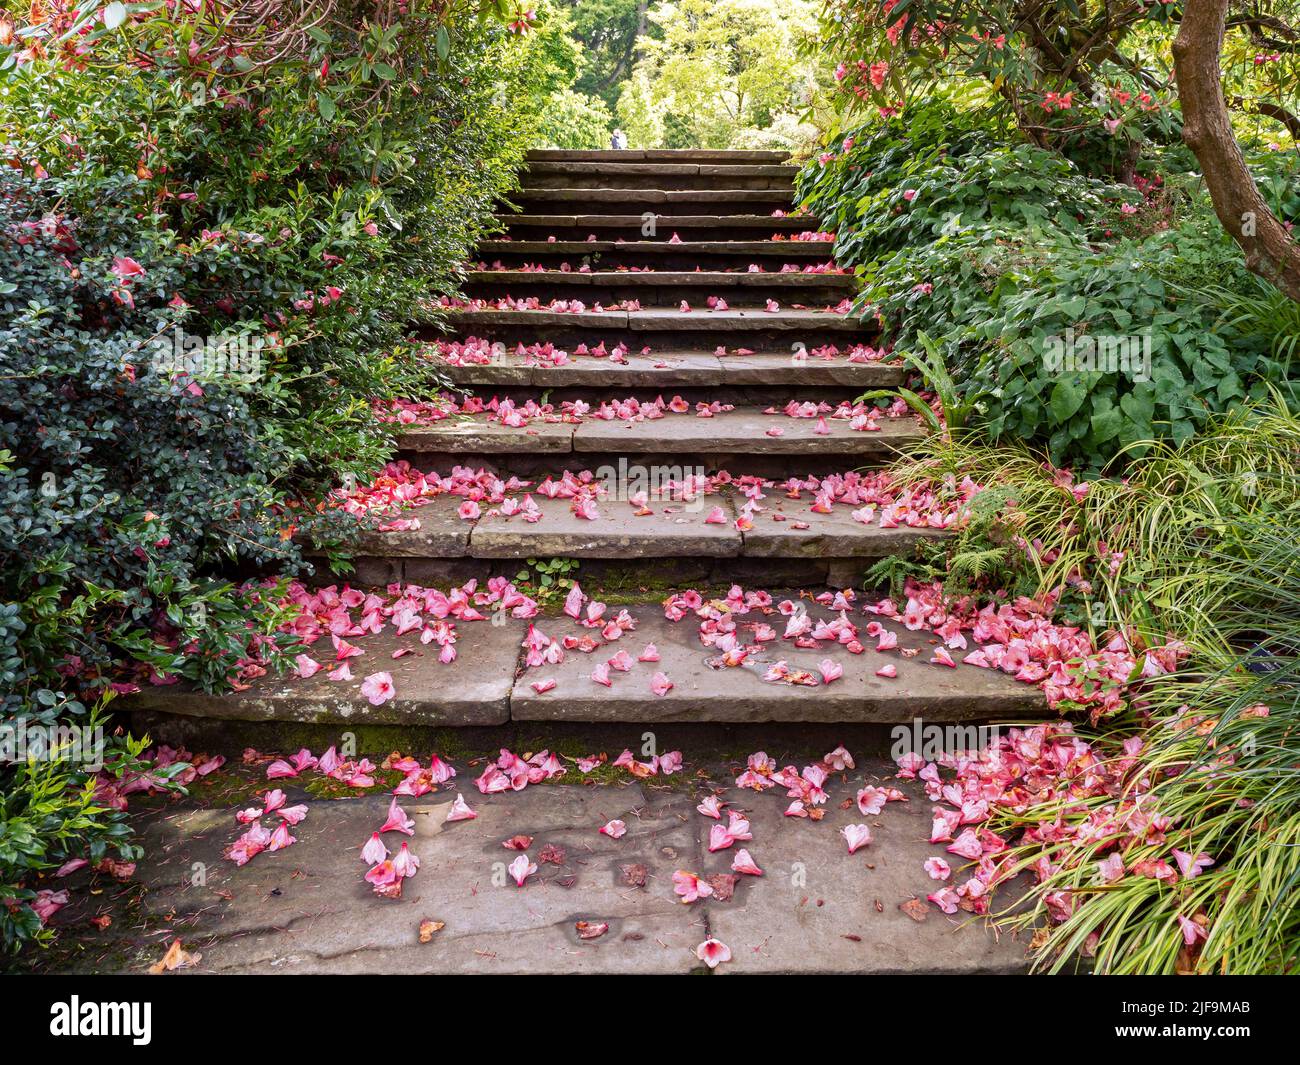 Garden steps covered with pink fallen petals Stock Photo